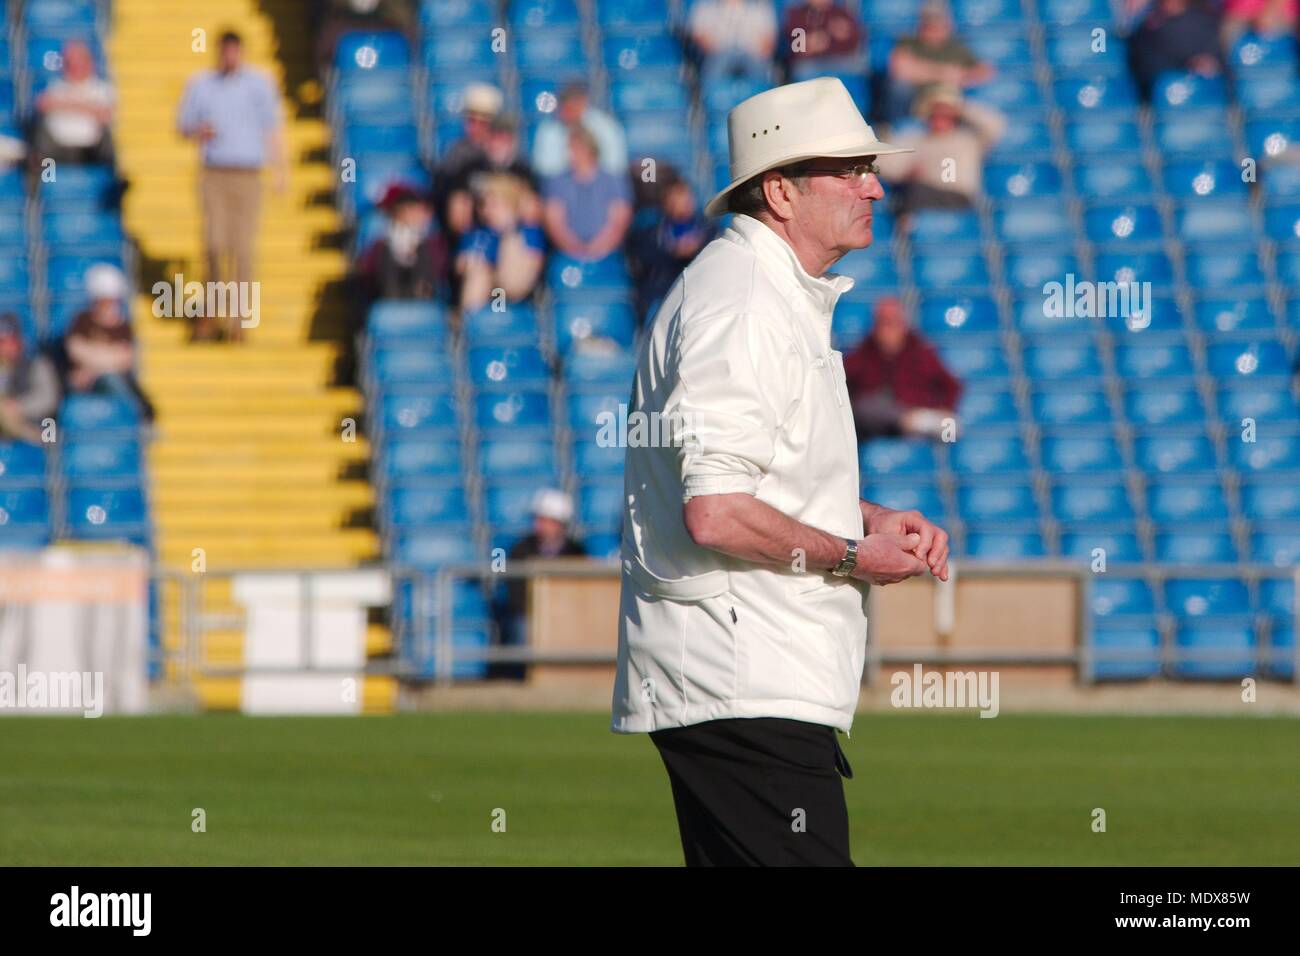 Leeds, England, 20 April 2018. Nick Cook umpiring in the Yorkshire against Nottinghamshire county championship match at Emerald Headingley, Leeds. Credit: Colin Edwards/Alamy Live News. Stock Photo